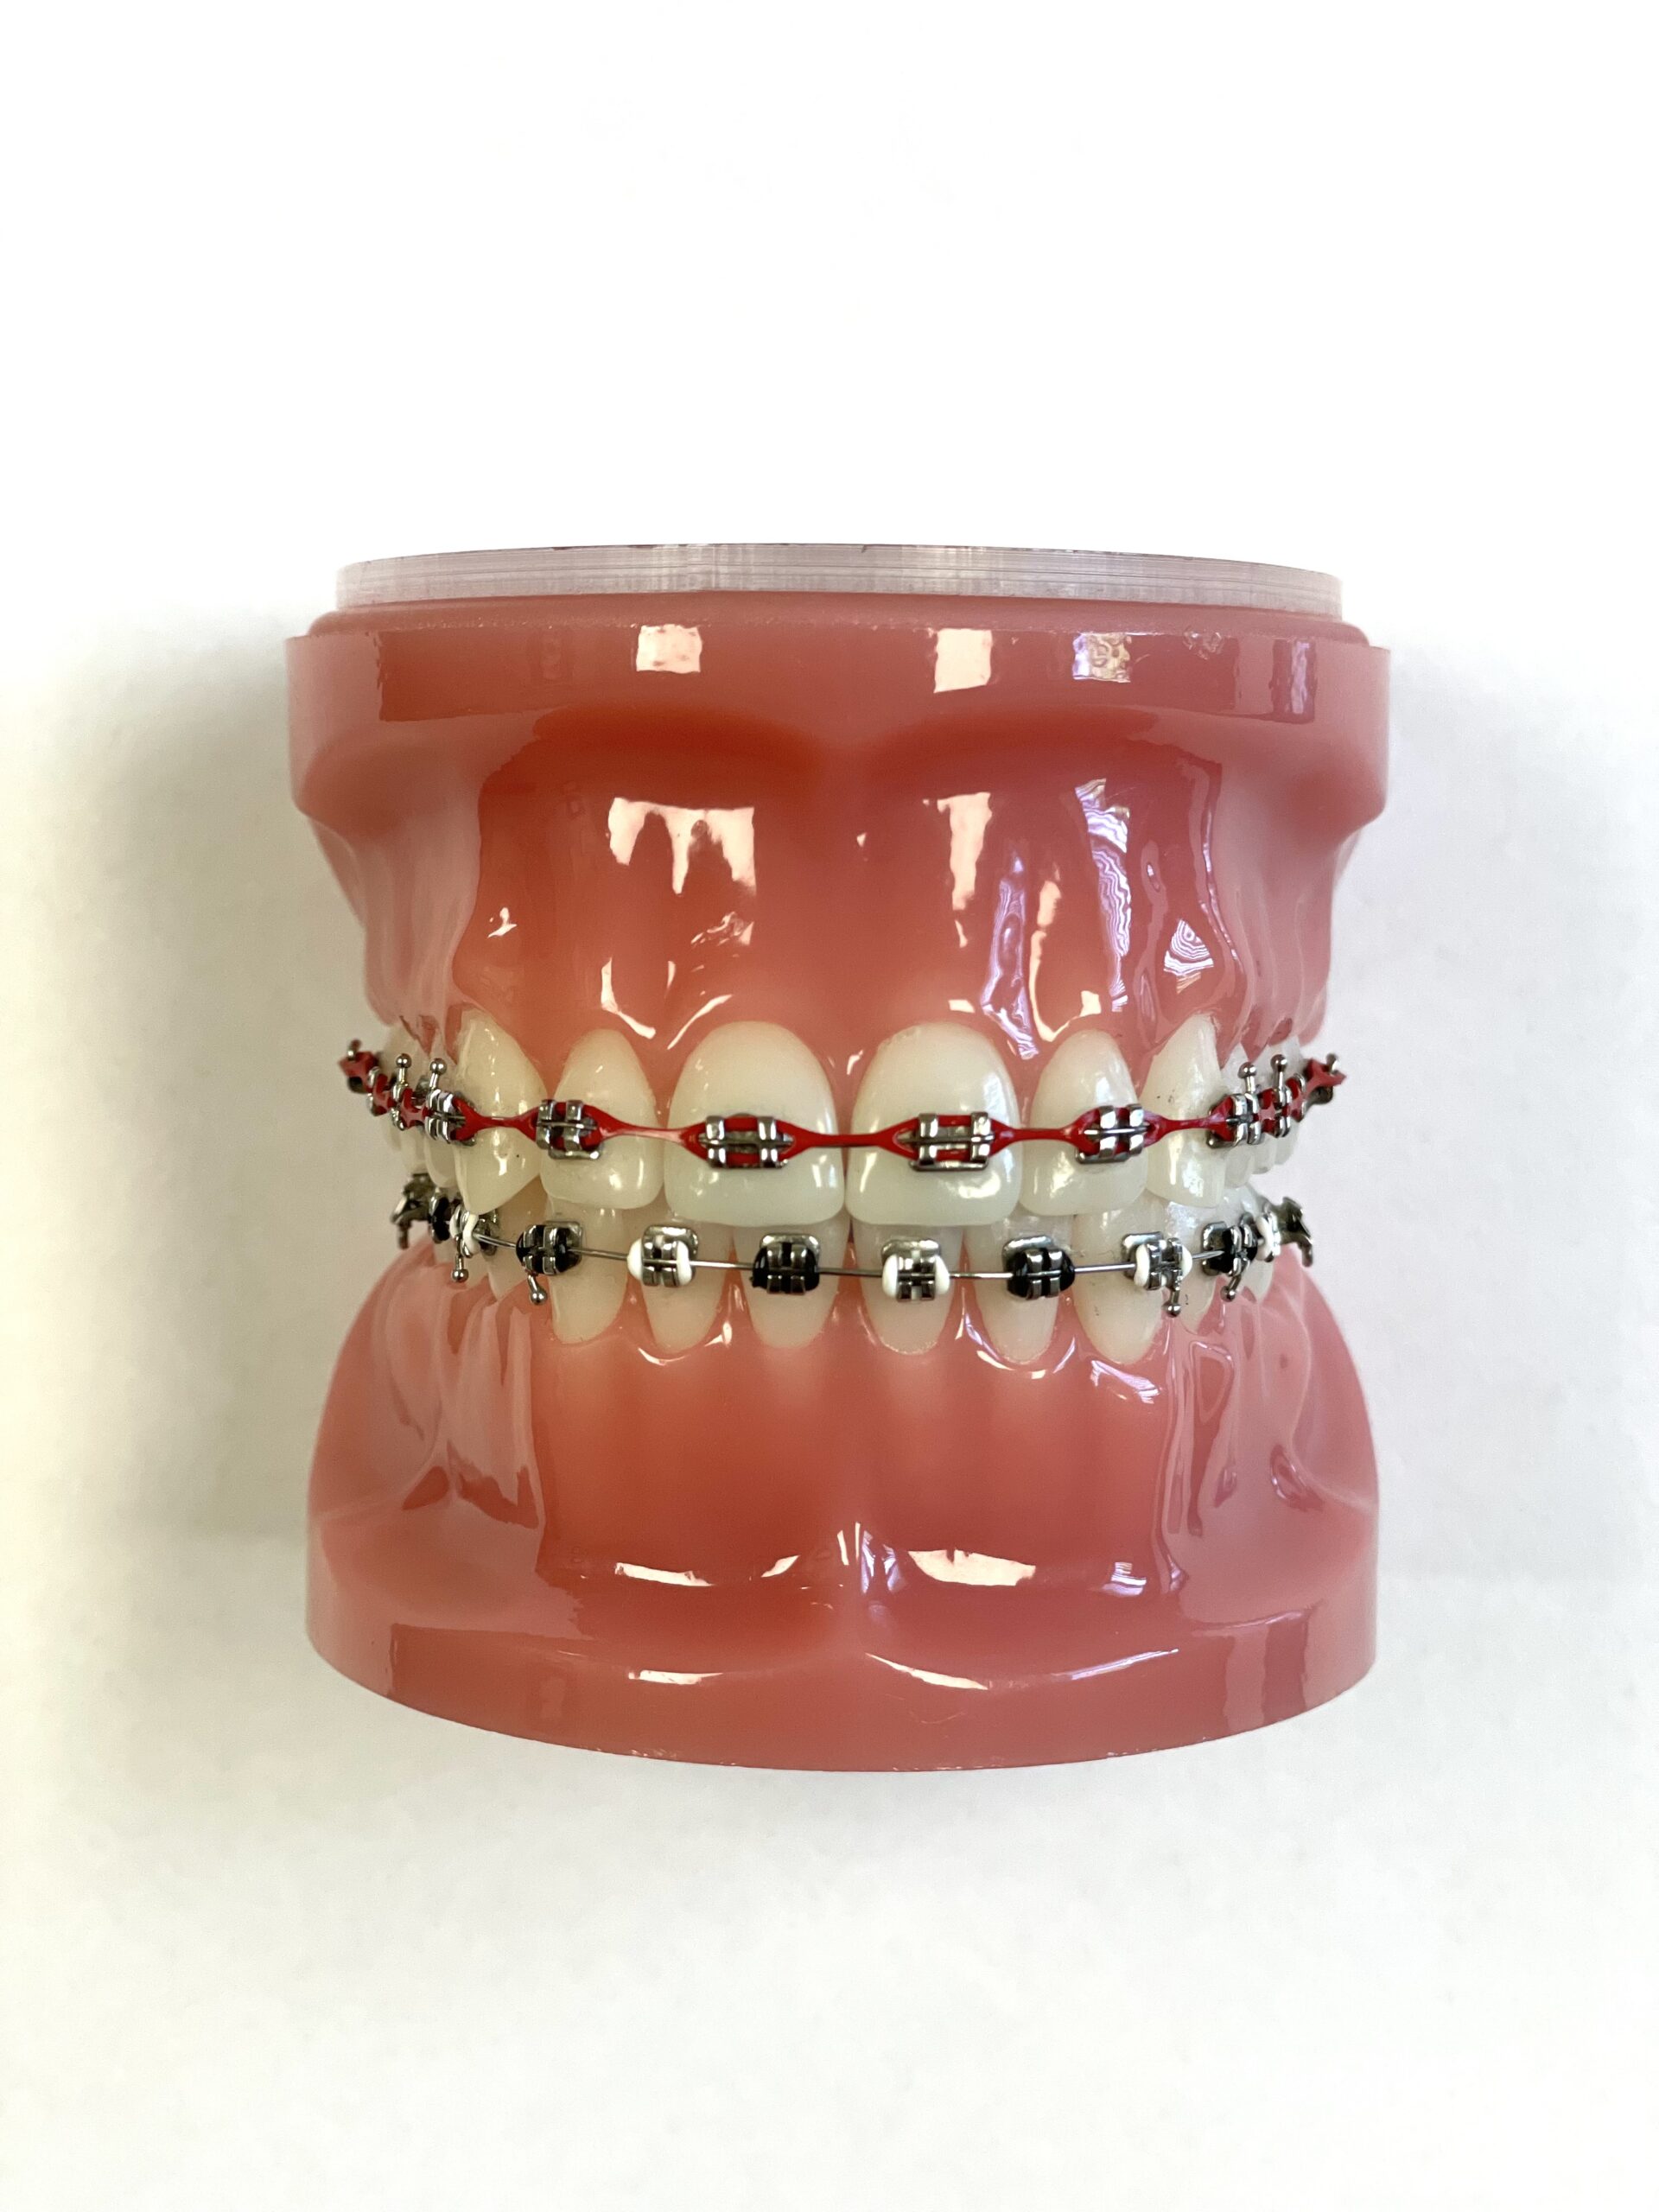 Traditional metal braces with colors.